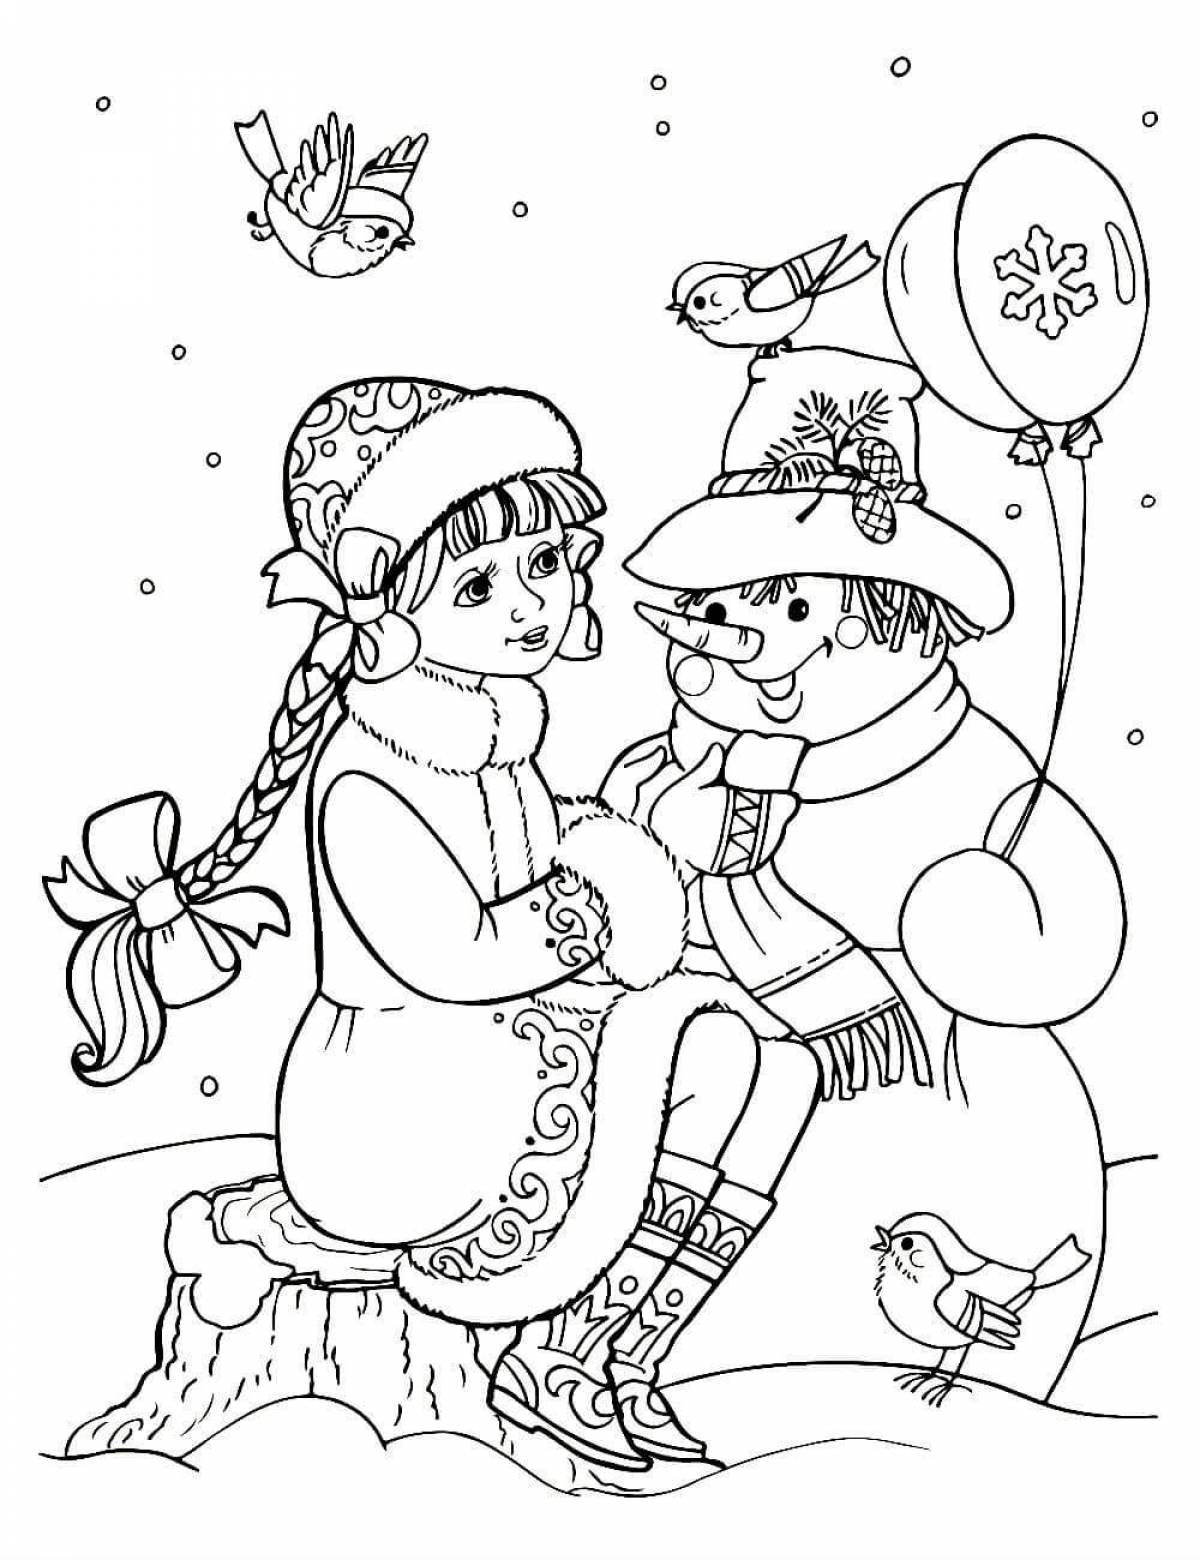 Dazzling snow maiden coloring book for kids